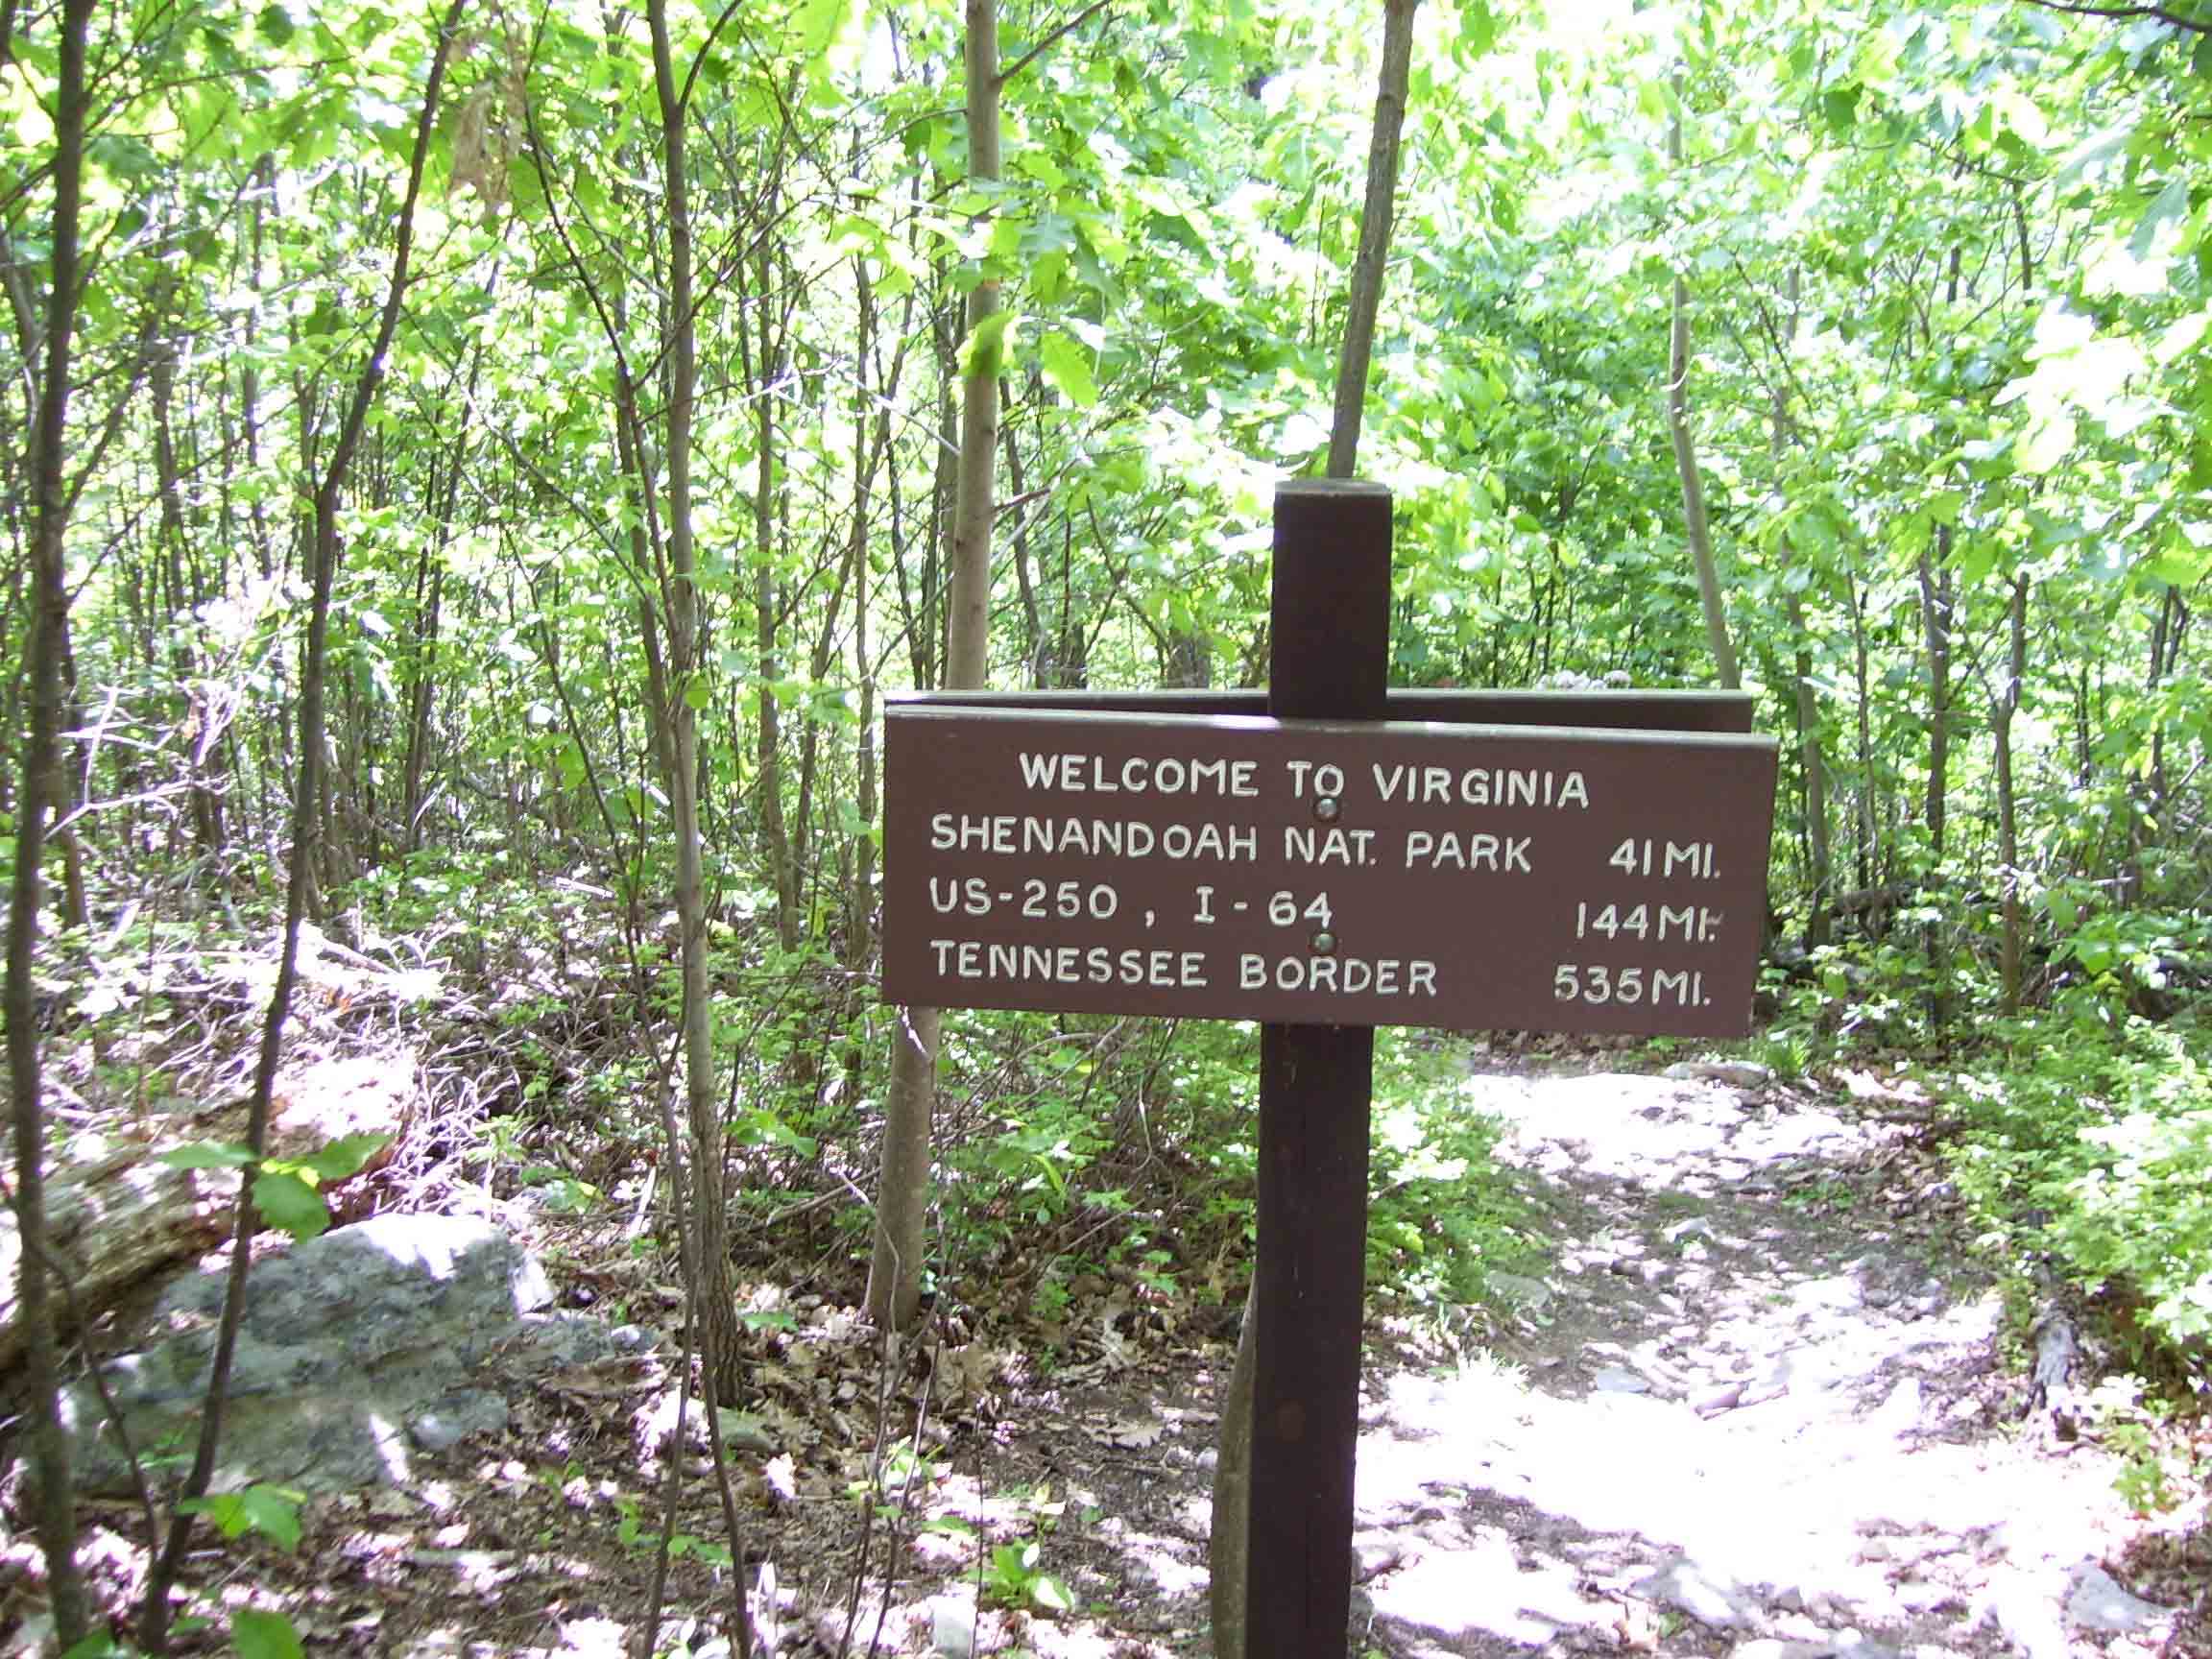 From this point south (approximately mile 11.1) the trail is clearly in Virginia for the next 530 miles except for one section on the VA/WV border on Peters Mountain. To the north the trail follows the VA/WV border for fifthteen miles before clearly going into West Virgiia.  Courtesy dlcul@conncoll.edu